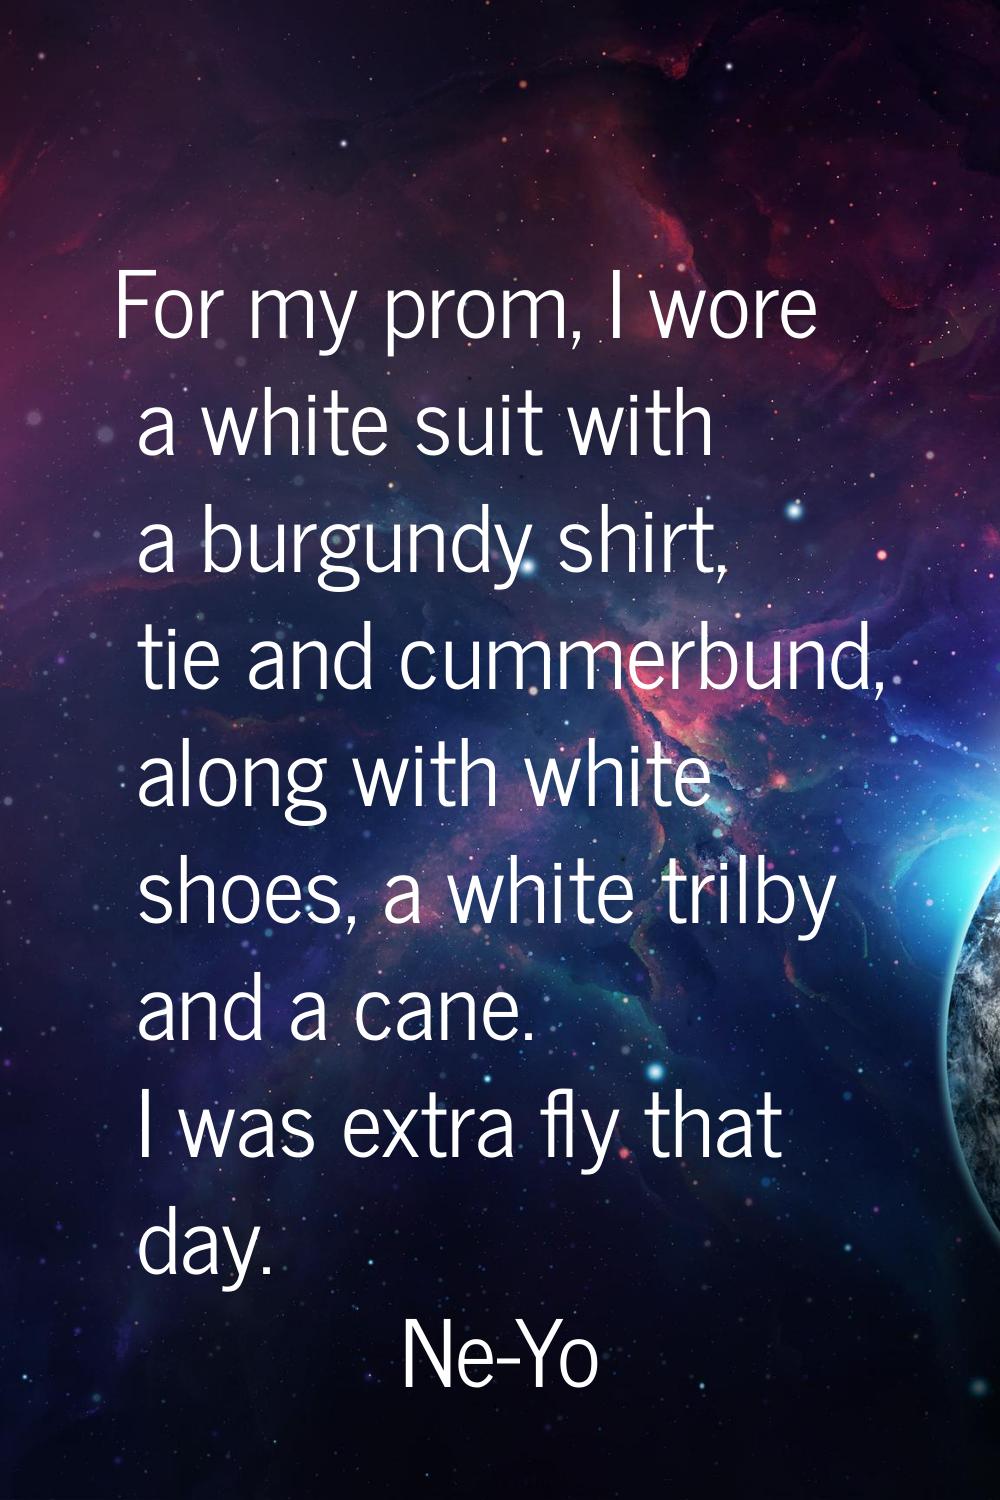 For my prom, I wore a white suit with a burgundy shirt, tie and cummerbund, along with white shoes,